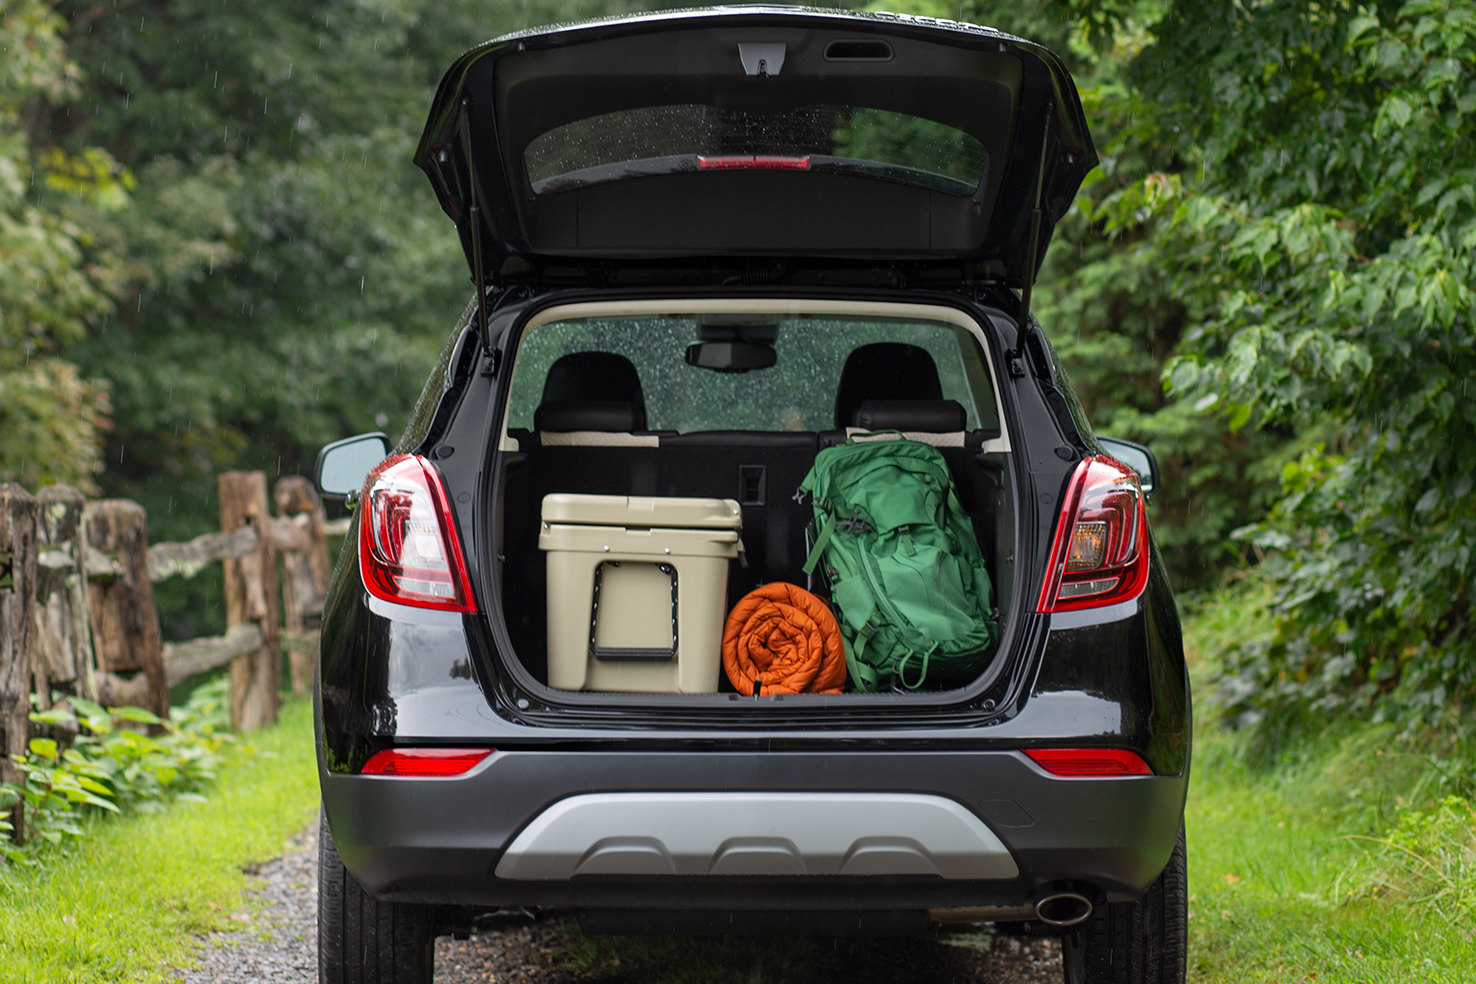 Pre-Owned Buick Encore cargo space